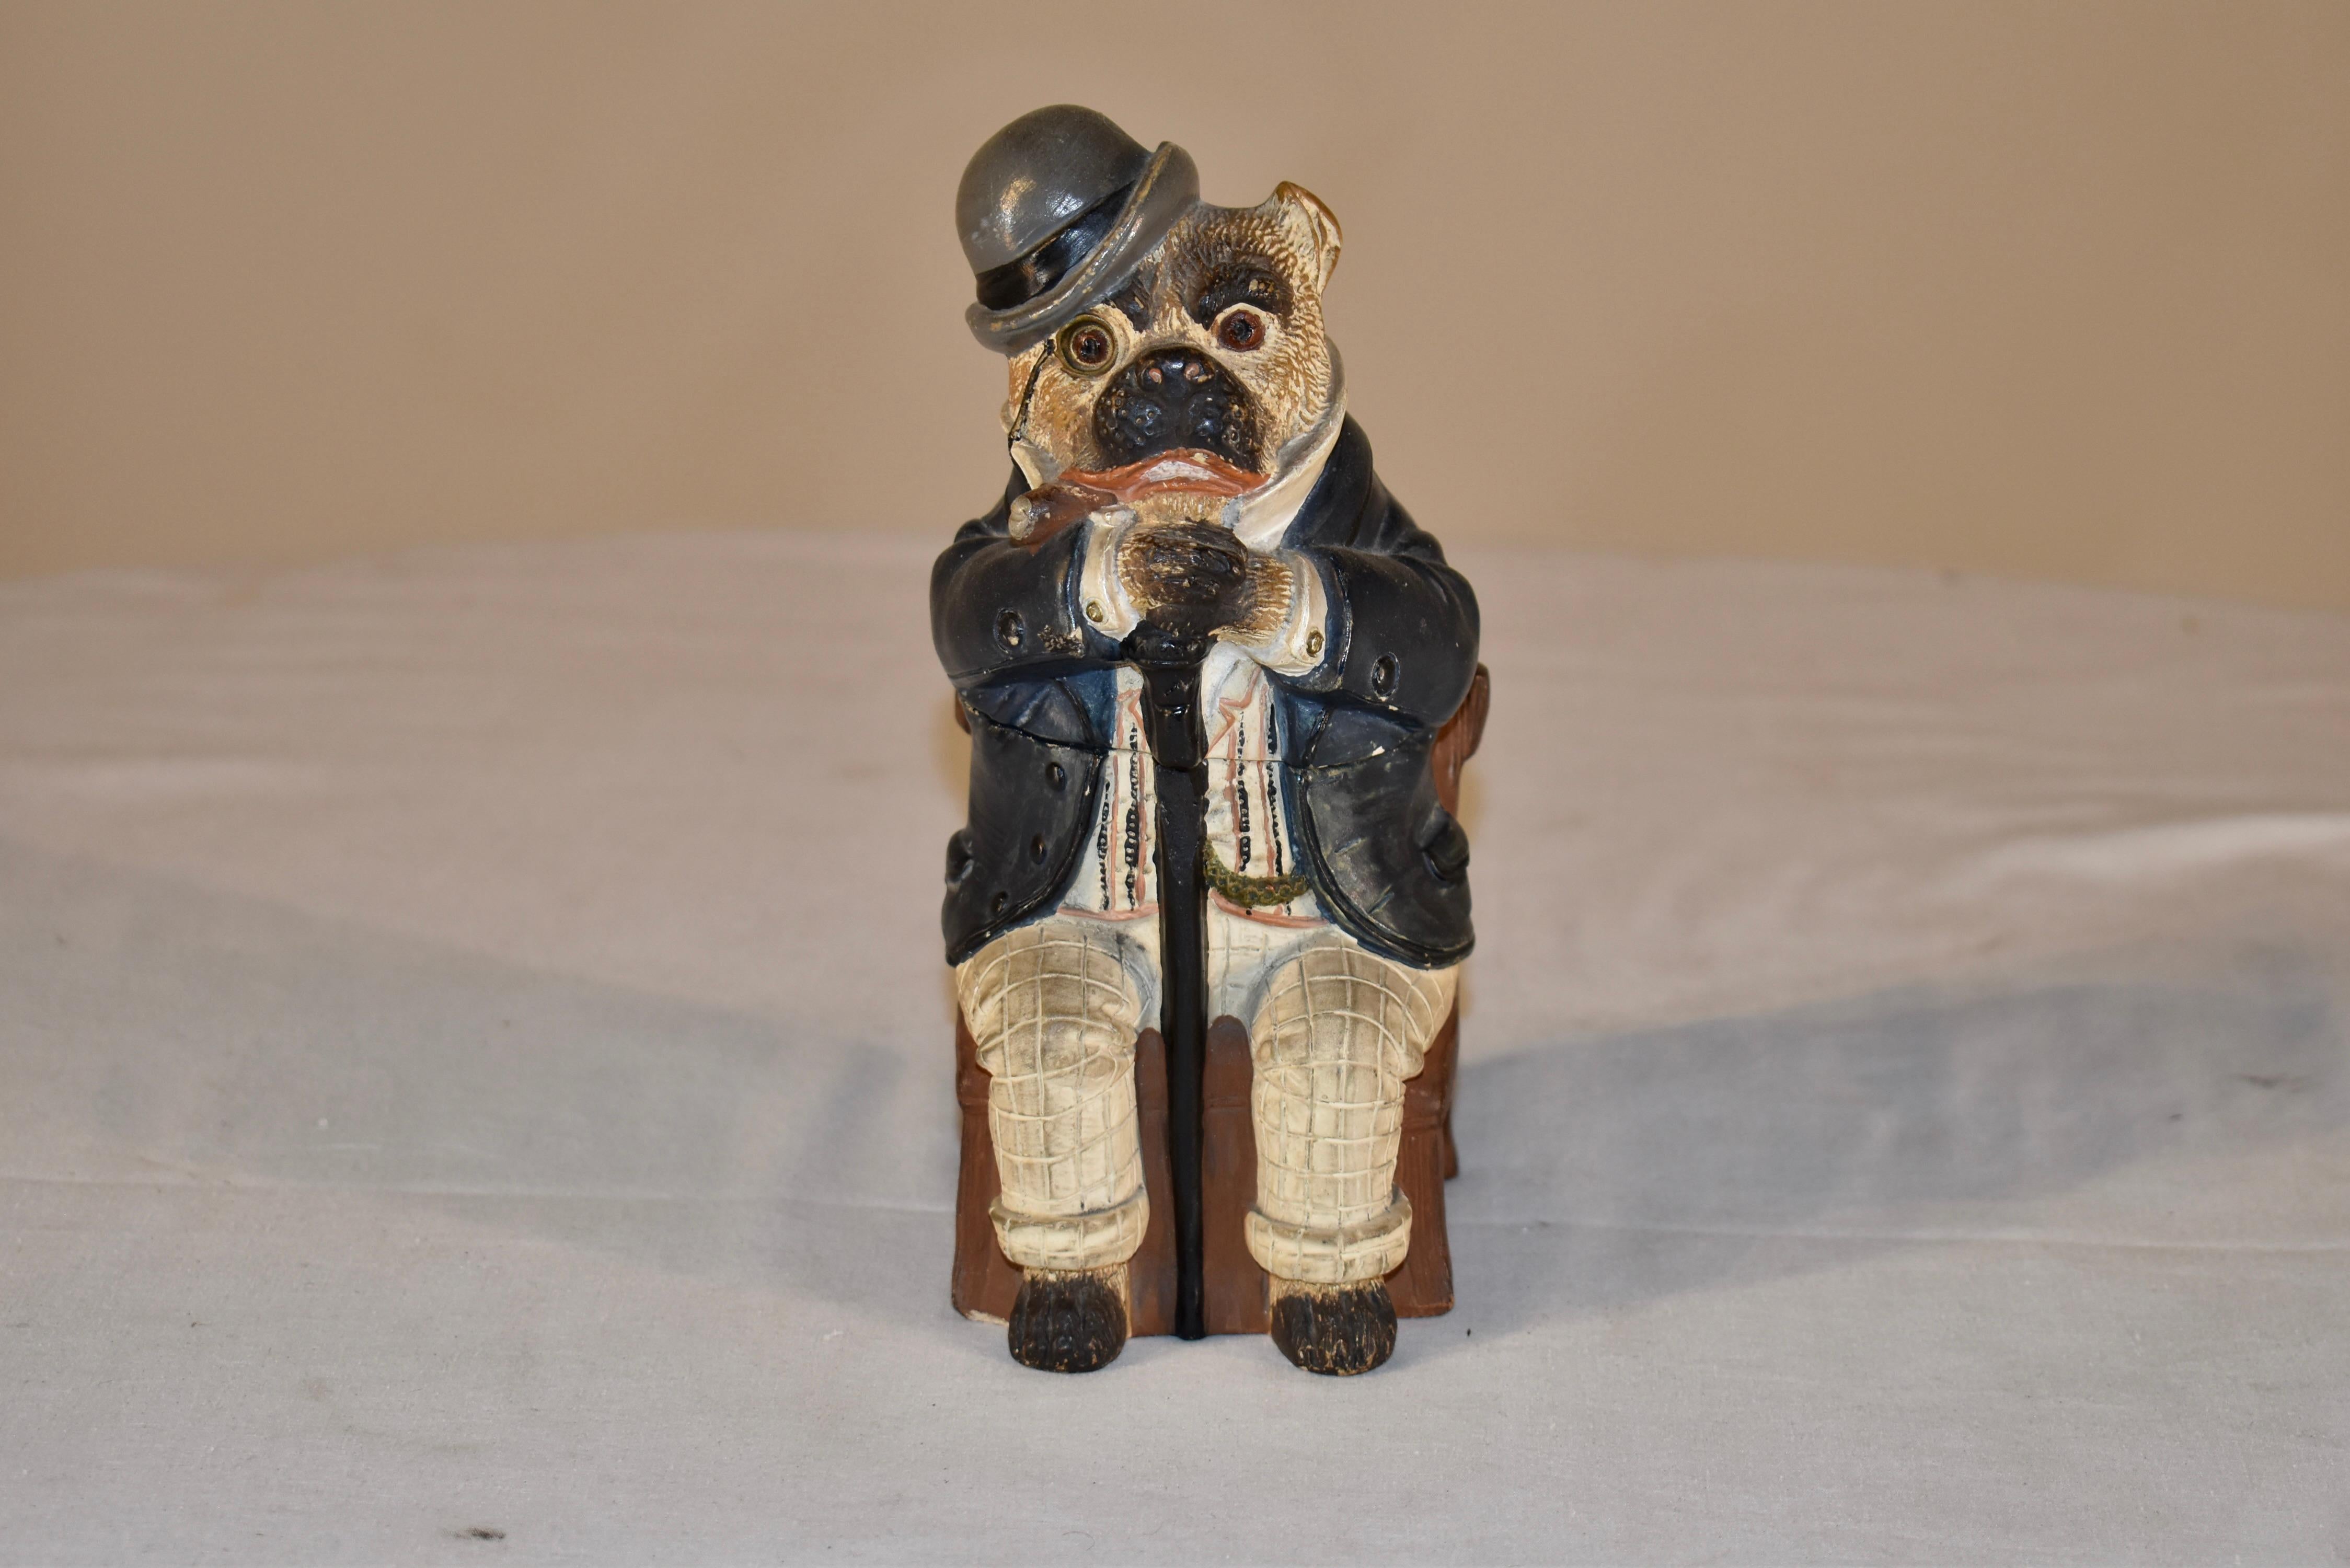 RARE 19th century signed Johann Maresh tobacco jar in the form of a gentleman bulldog. This is one of those wonderful tobacco boxes you look for to be the star of your collection. He is so whimsical in his monocle and bowler hat, seated with a